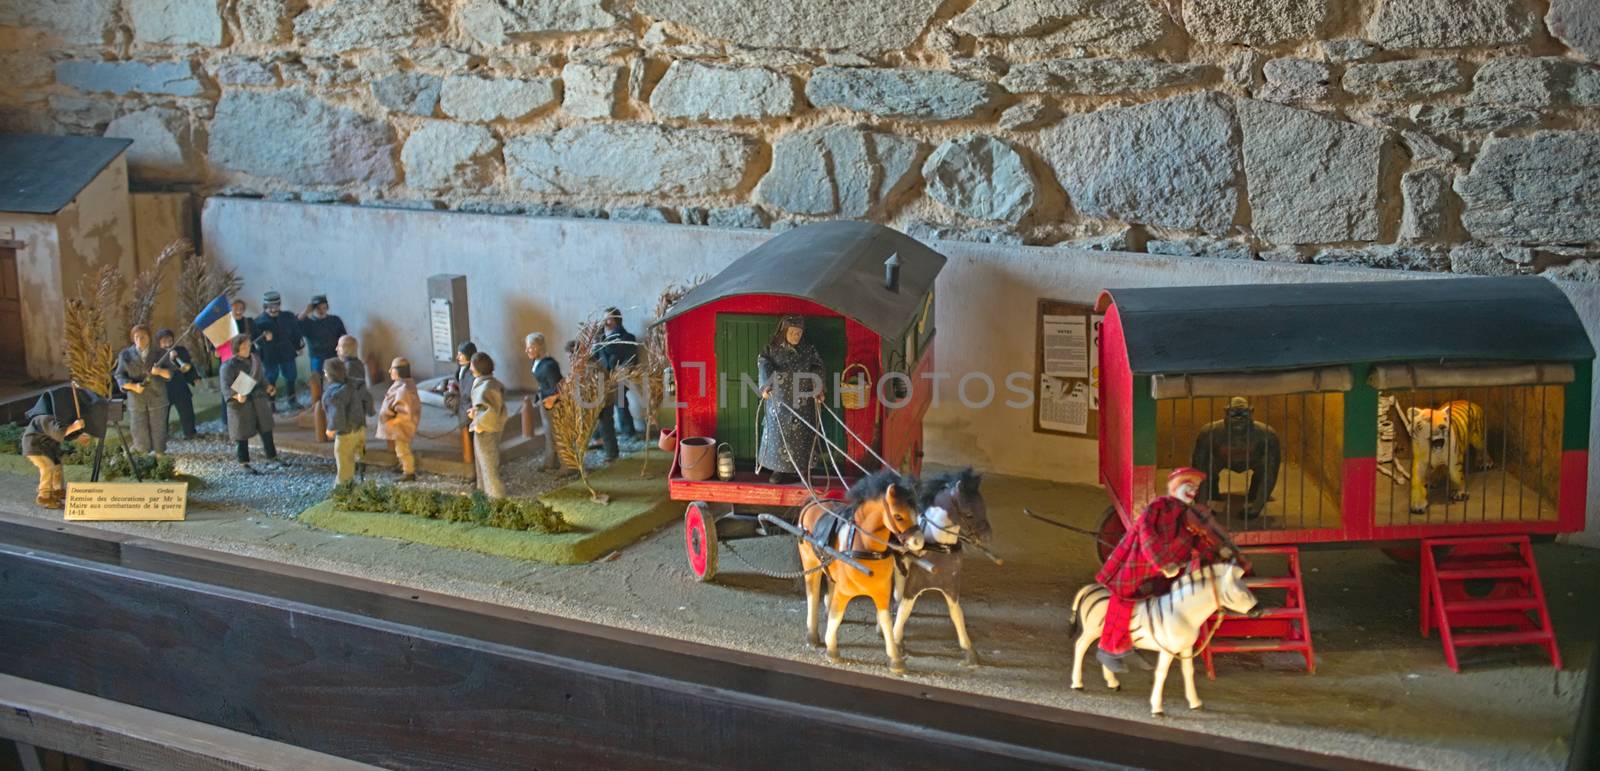 Small scale model toys of an circus and people gathered for a photograph